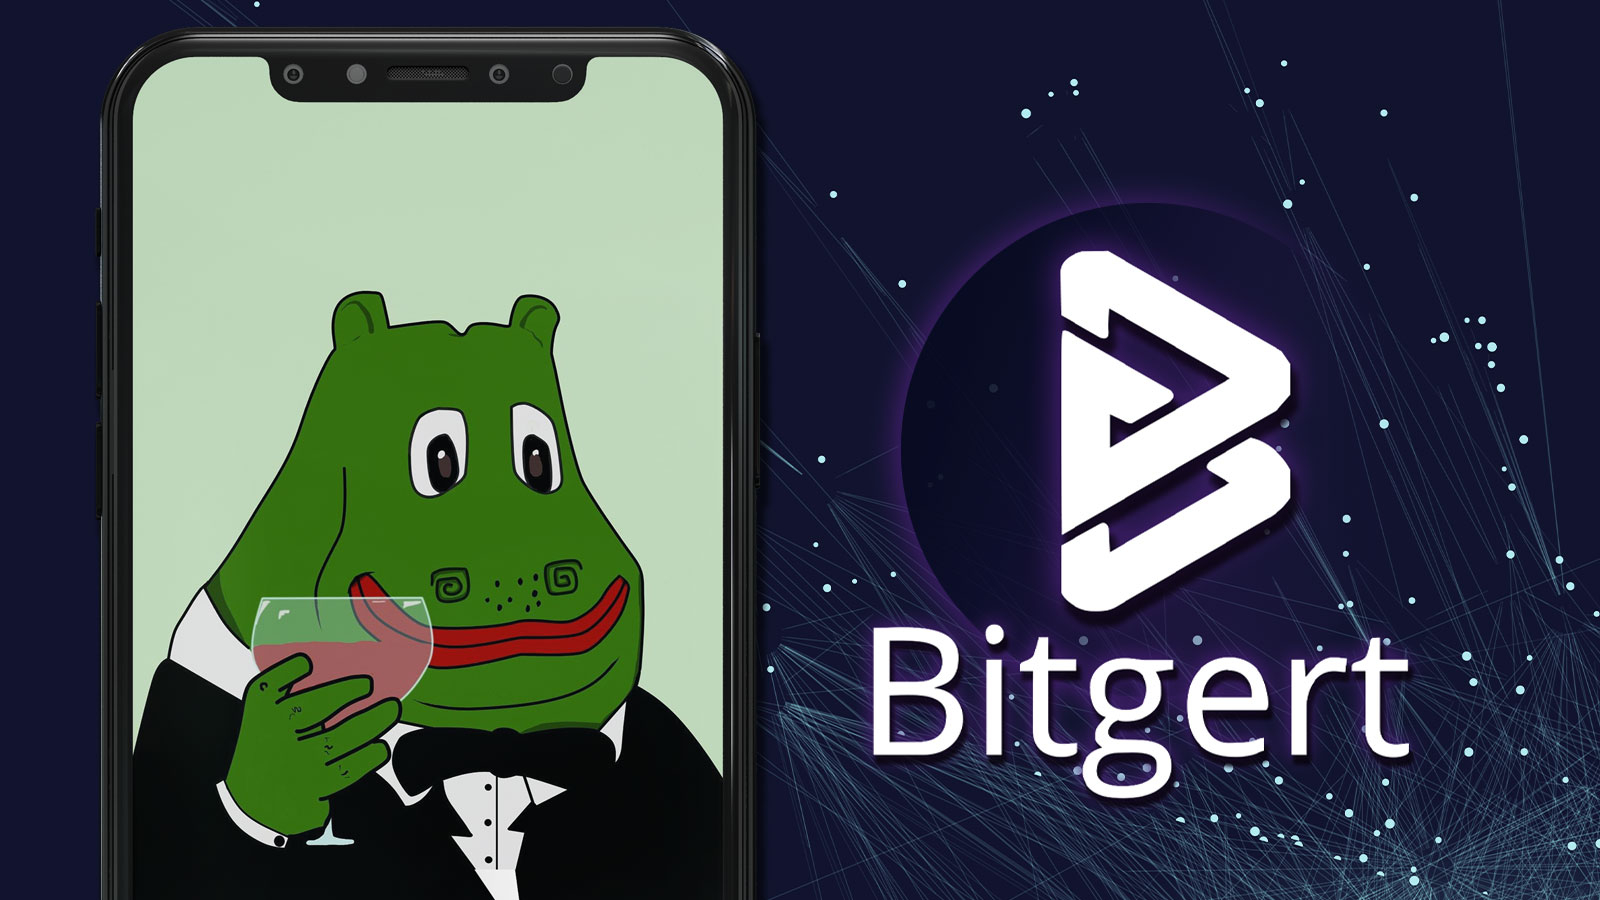 PEPE, Shiba Inu Are Trying to Beat Market, Bitgert Introduces BEFE